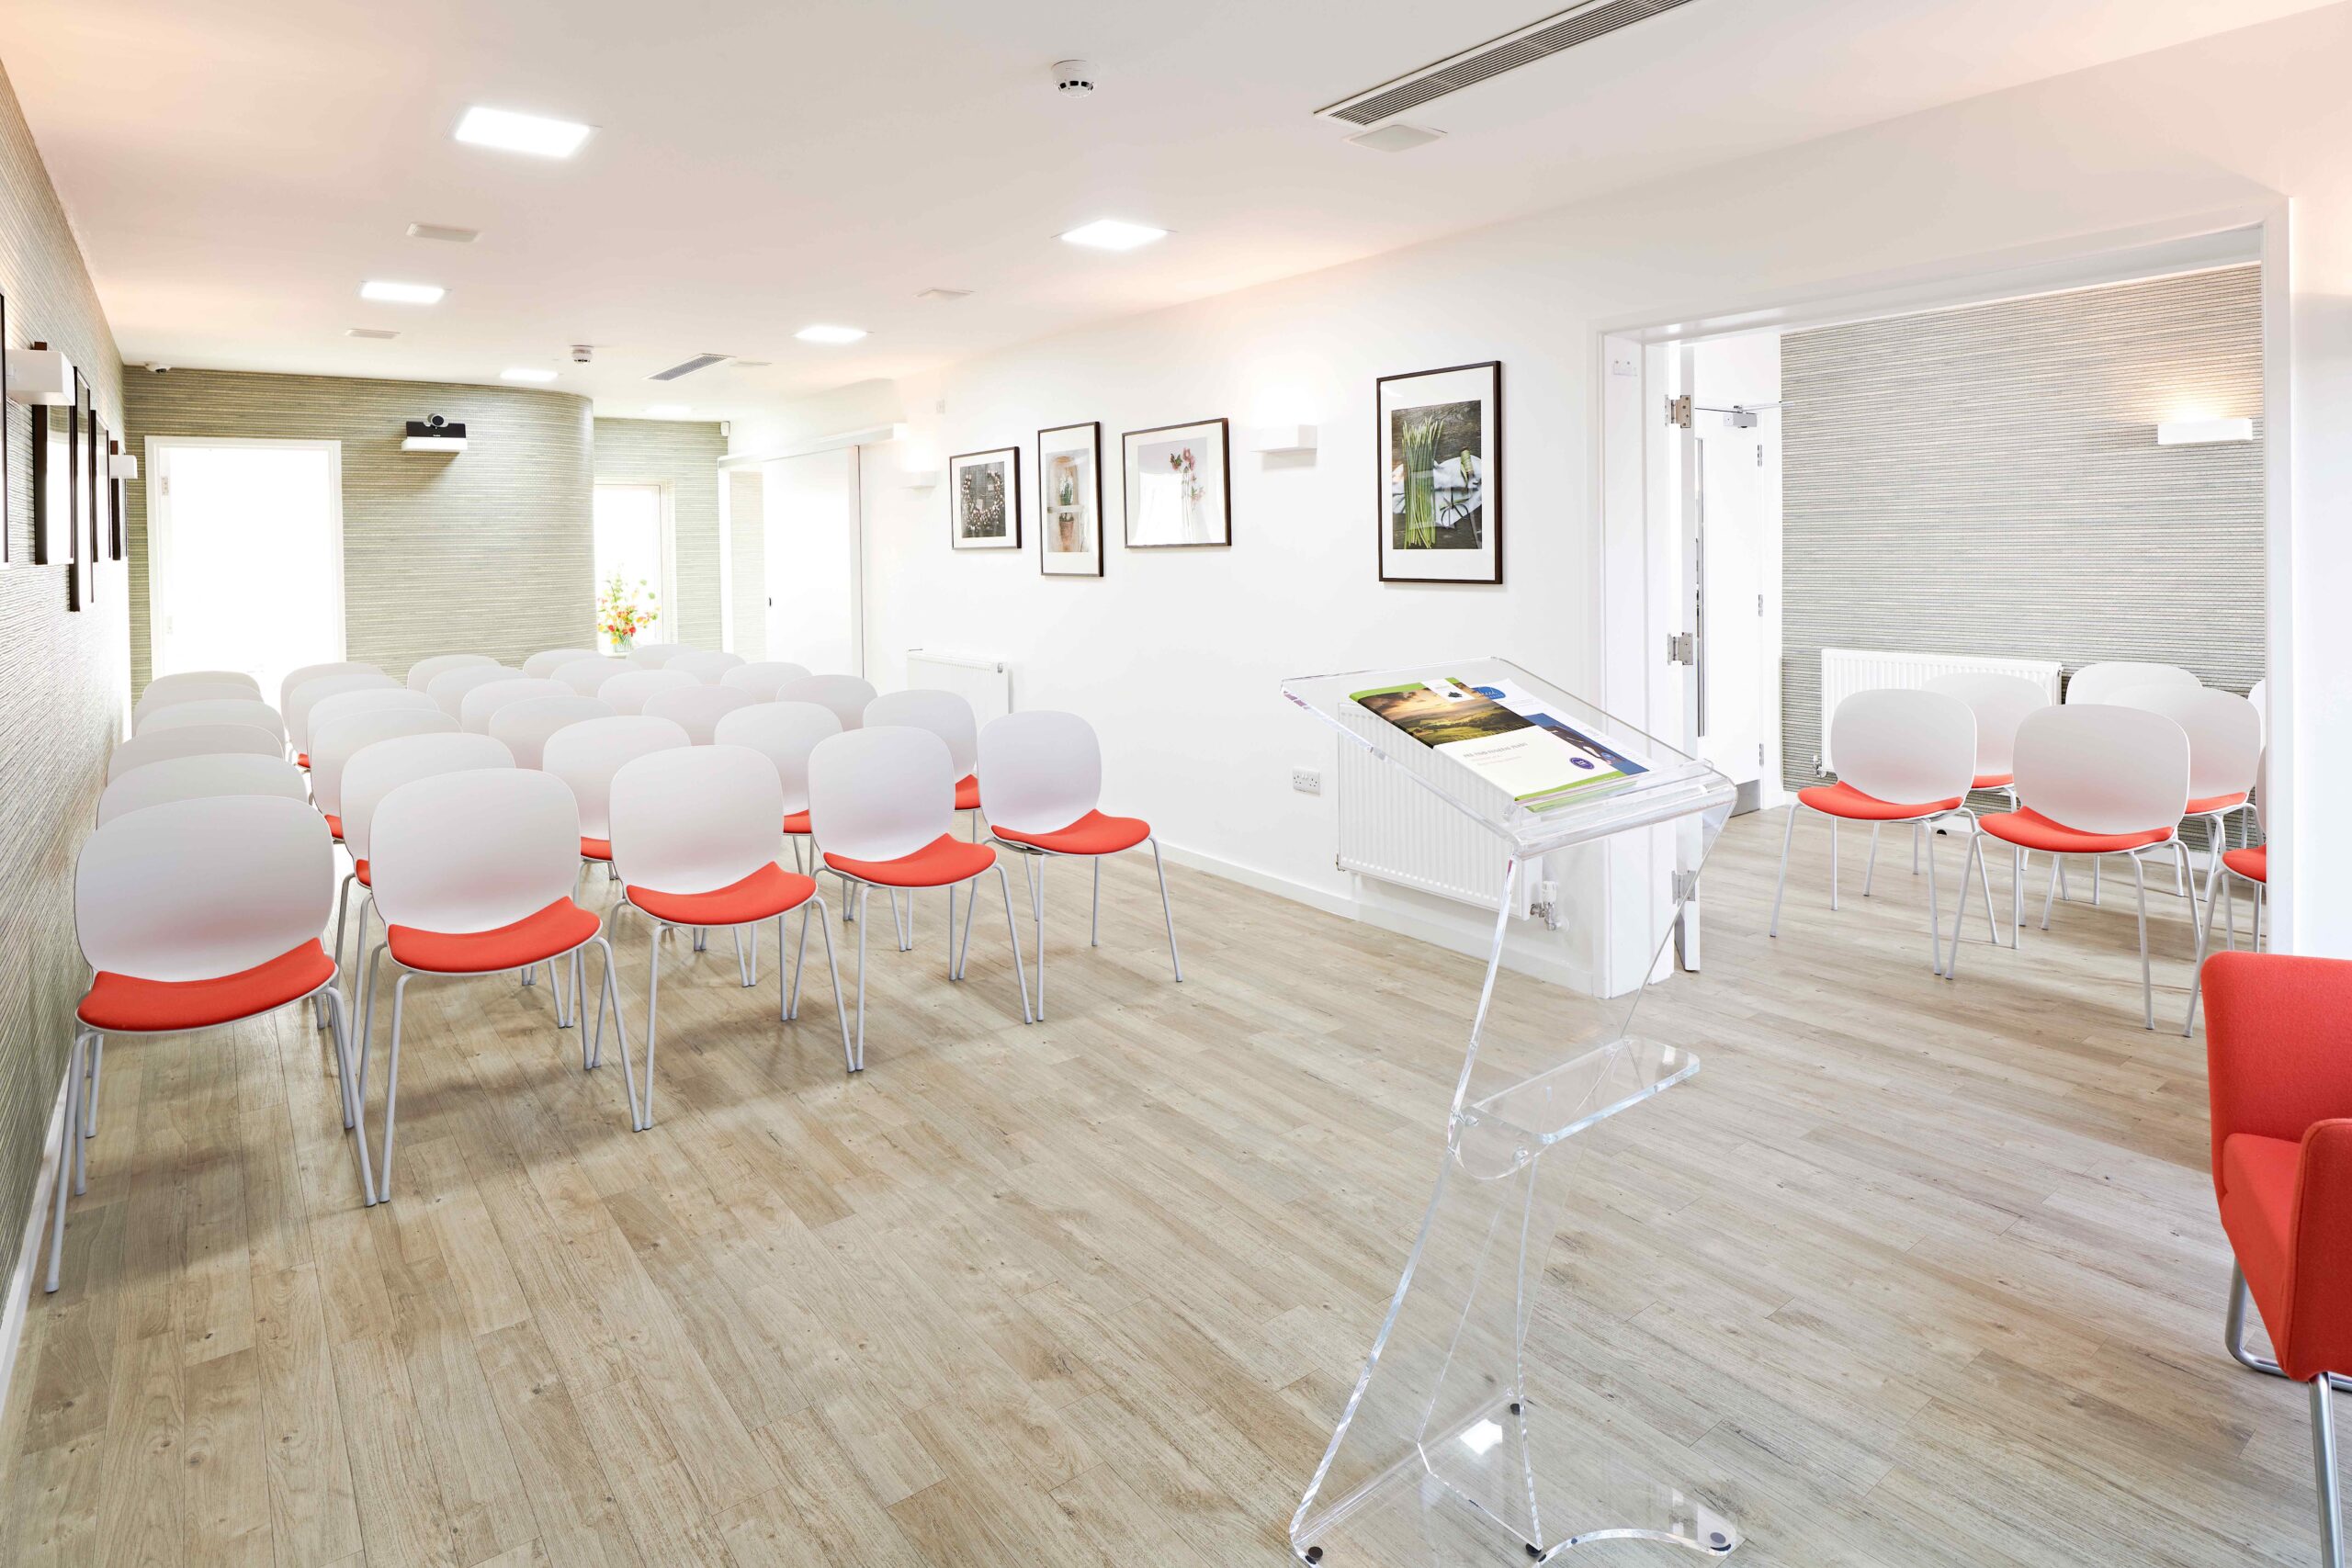 A picture-perfect setting for ceremonies in Corfe Mullen, complete with comfortable seating and elegant accents